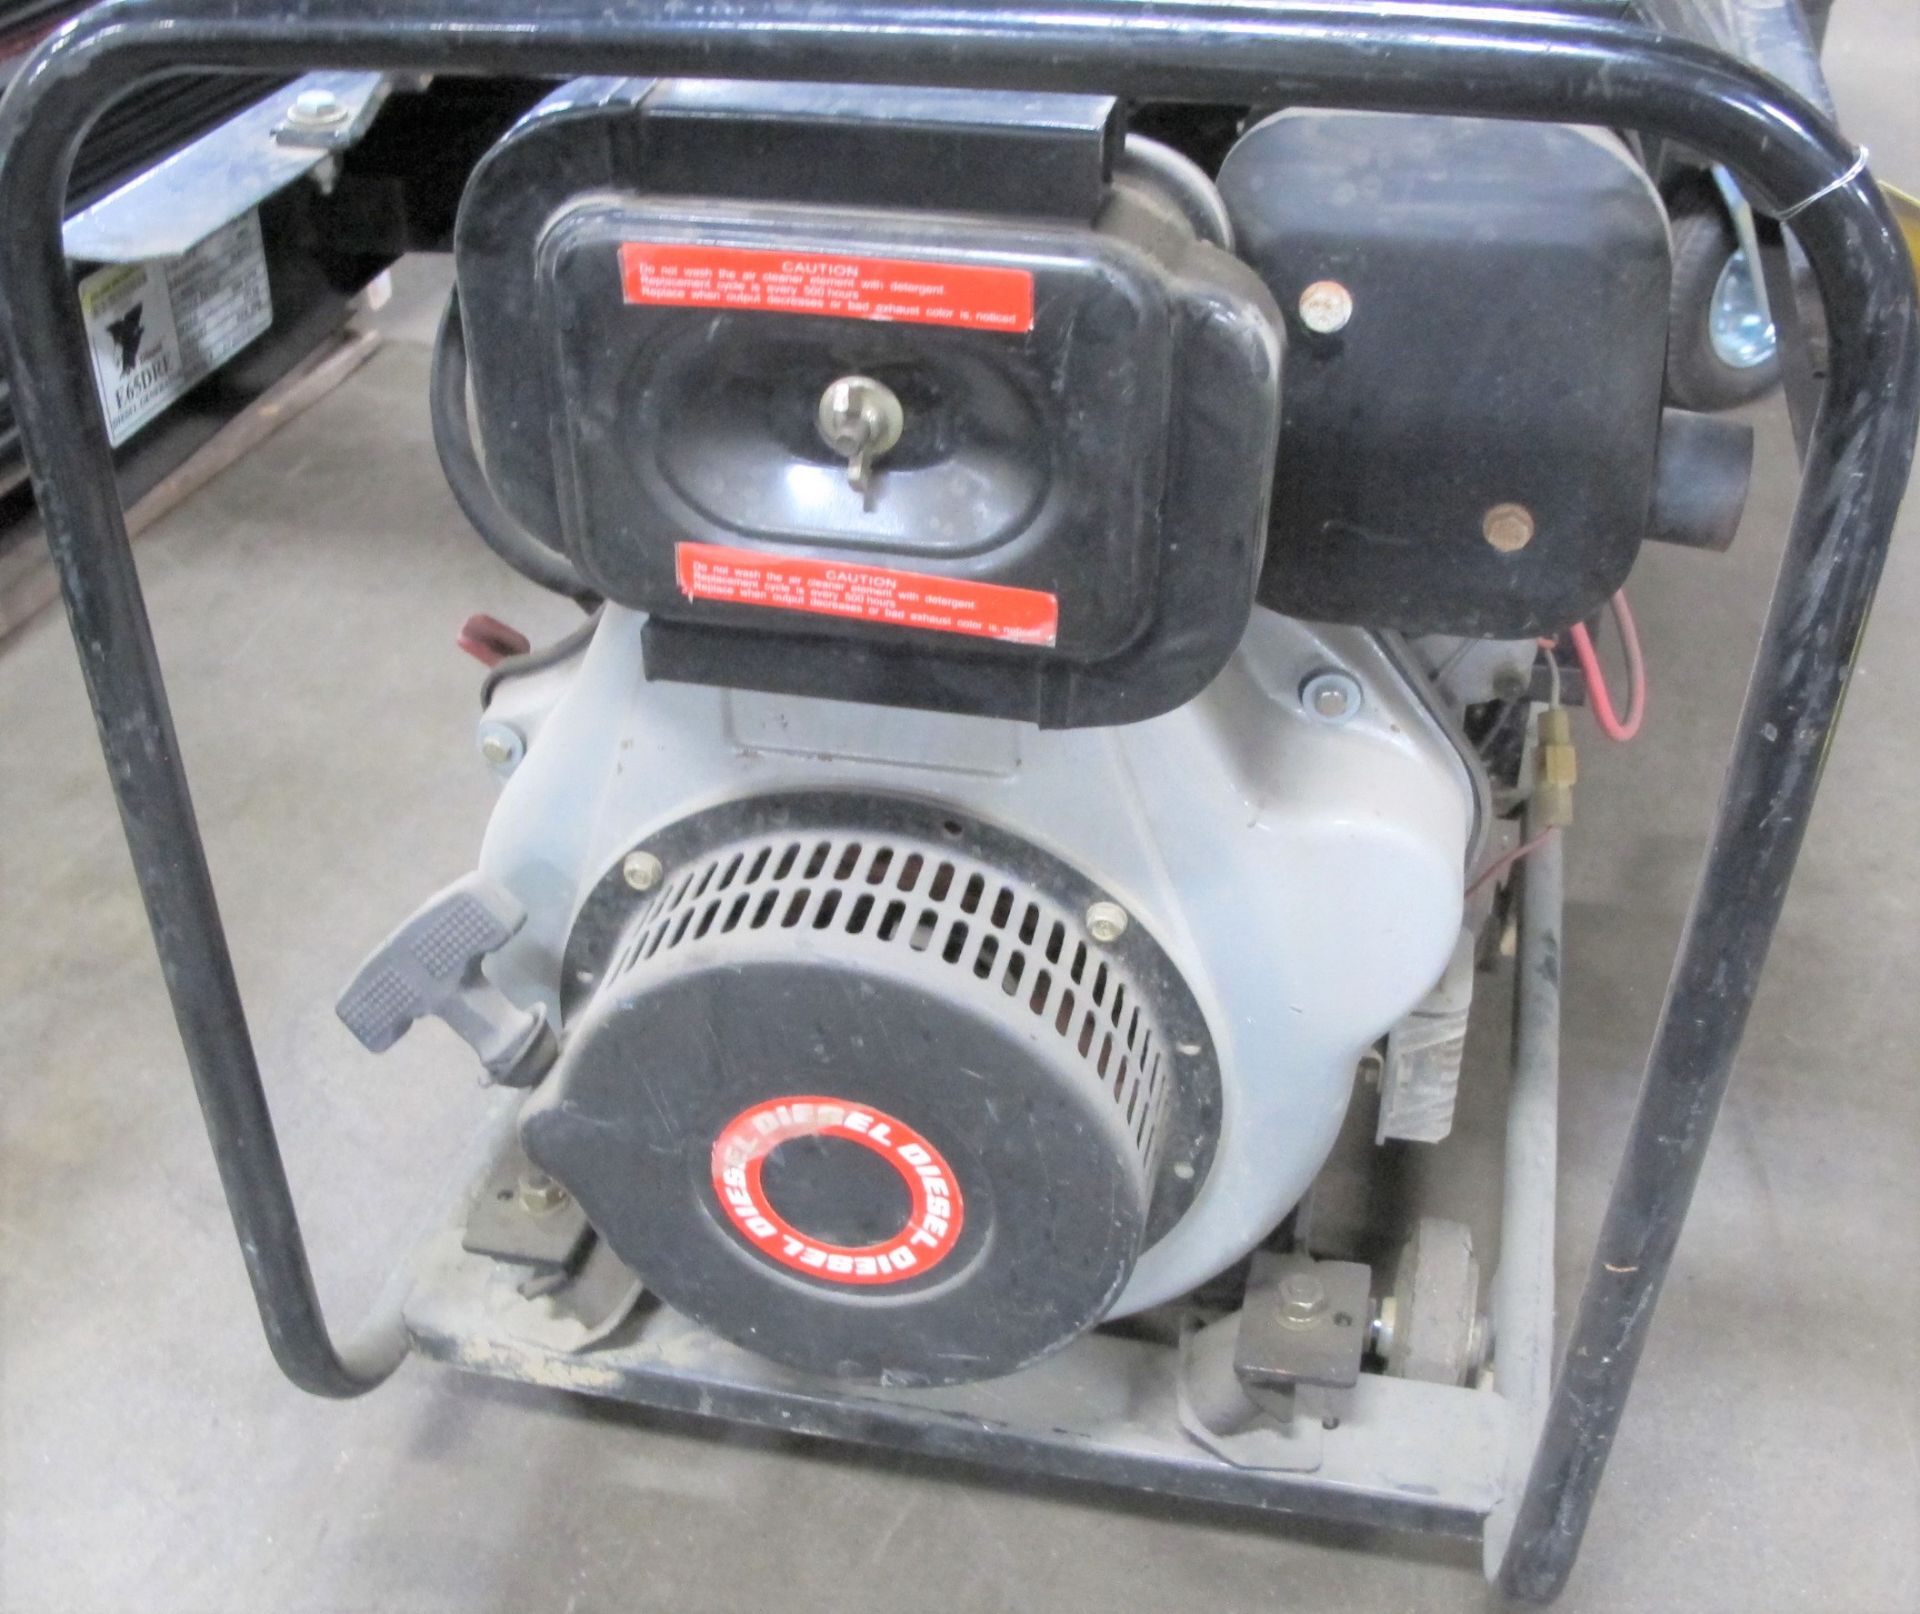 EAGLE POWER TOOL E65DRE AIR COOLED DIESEL POWER GENERATOR - Image 3 of 4